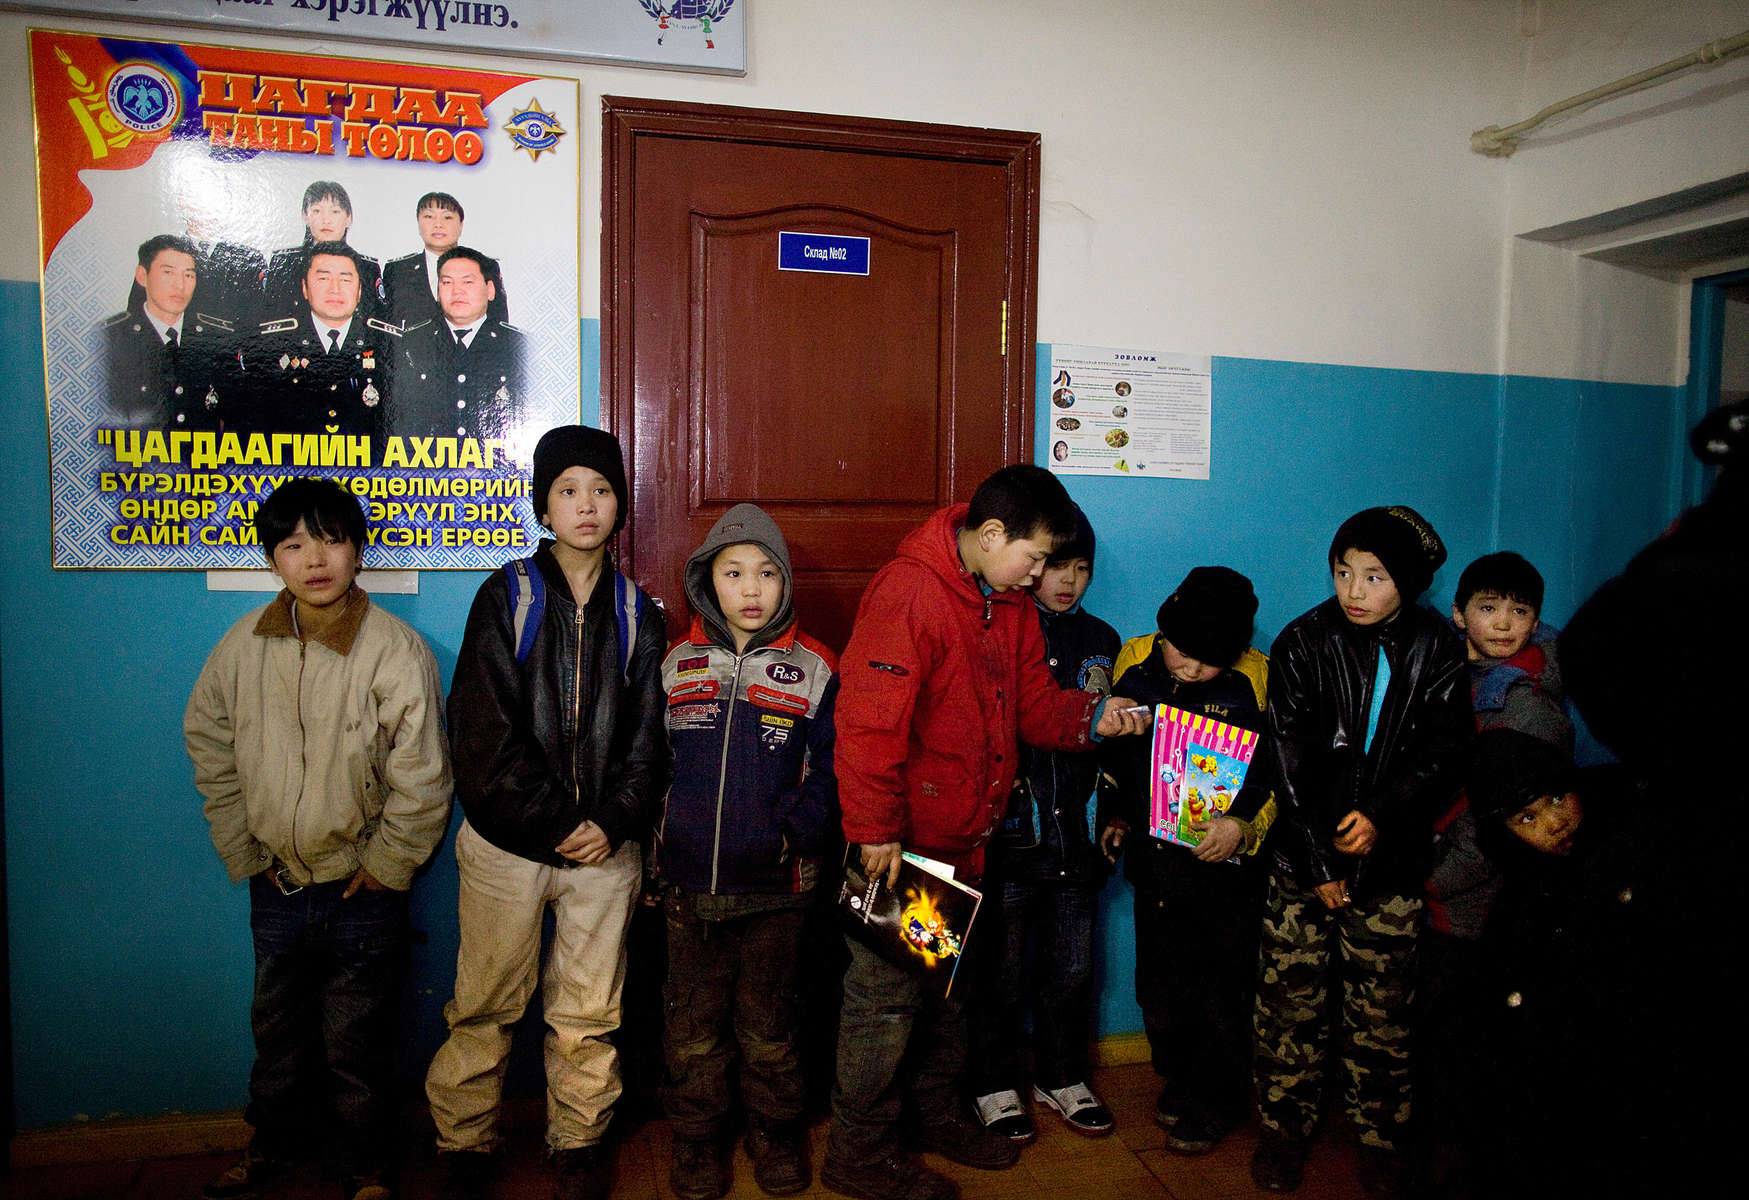 ULAAN BAATAR, MONGOLIA-MARCH 11 :  Mongolian street kids wait in line to get registered at the child detention center March 11, 2010  in Ulaan Baatar, Mongolia. The police picked up a dozen boys to get them off the streets in the cold weather housing them at the Ulaan Bataar Child Welfare/ detention center sponsored by World Vision. There about 45 kids live in the dormitory where they get hot food, showers, and some educational activities until their parents claim them. Before the children can go into more permanent shelters they are kept in the welfare center for up to 6 months. After that the state labels them as being abandoned or orphaned. Mongolia suffers with a very high number of alcoholics, all consuming cheap Mongolian vodka that is readily available to the poor and the unemployed, Many Mongolians have immigrated to the capitol city from the far away provinces seeking employment, living in rented traditional circular felt yurts with no running water or electricity. The problem is severe causing the number of street children to rise,  fleeing their abusive, dysfunctional homes. Some children are regularly beaten at home, and for the impoverished it is common to send the child out to make money. During the winter this means extreme hardship, the children out on the city streets are dealing with temperatures dropping as low as -25C mid- Winter. This year Mongolia has experienced the worst winter in 30 years. Presently the government has declared an emergency requiring foreign aid to alleviate the impact of the {quote} Zud{quote} ( Mongolian term for a multiple natural disaster) caused by bitter cold and thick snow that has effected 68% of the provinces. (Photo by Paula Bronstein /Getty Images)